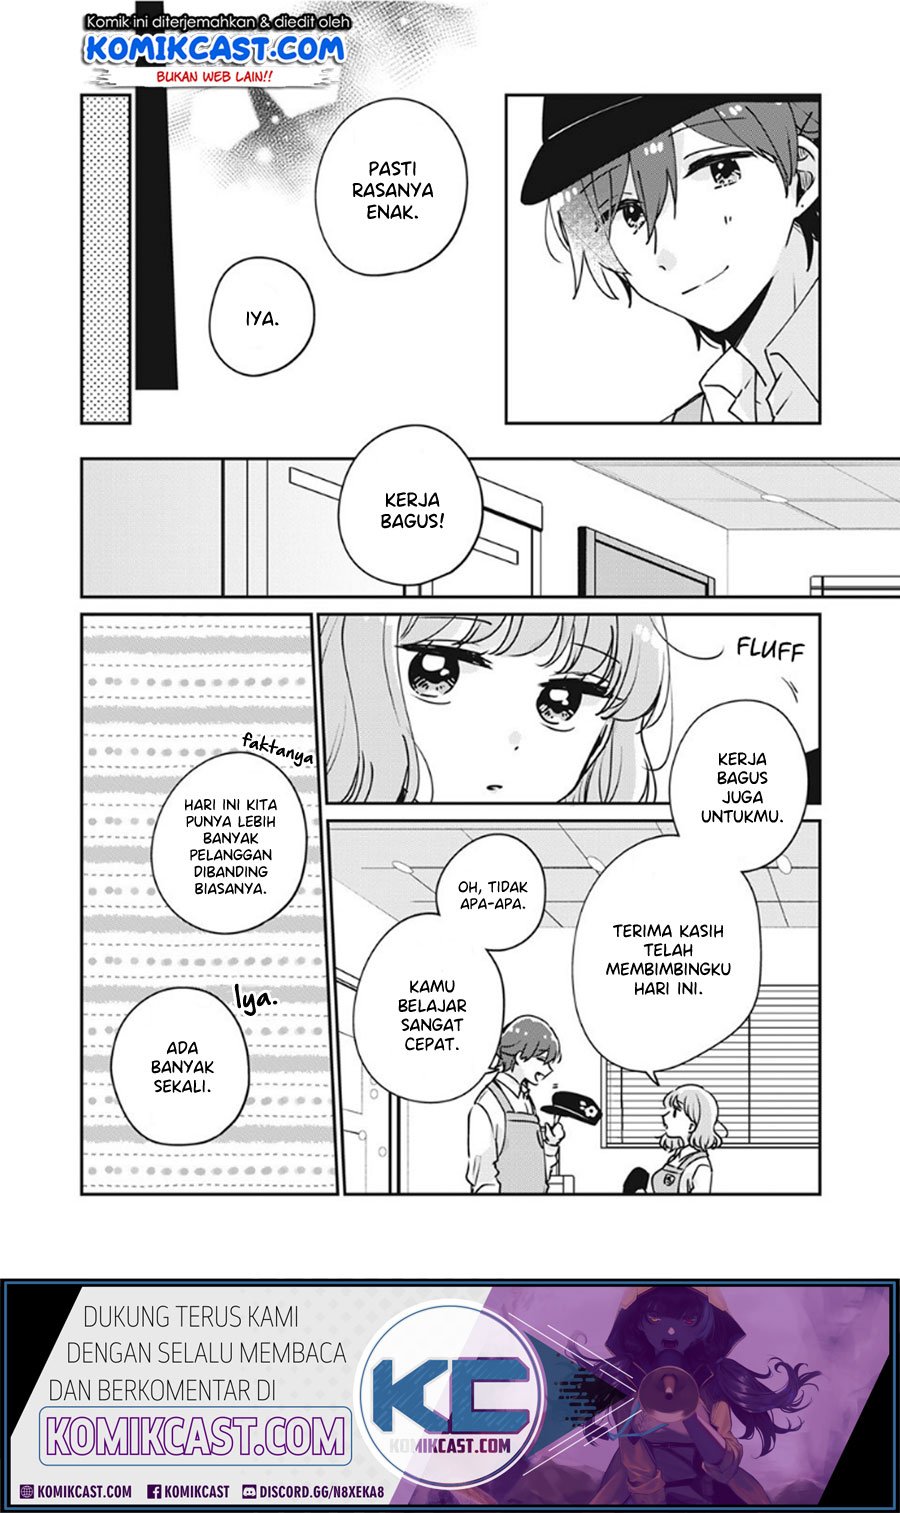 It’s Not Meguro-san’s First Time Chapter 34